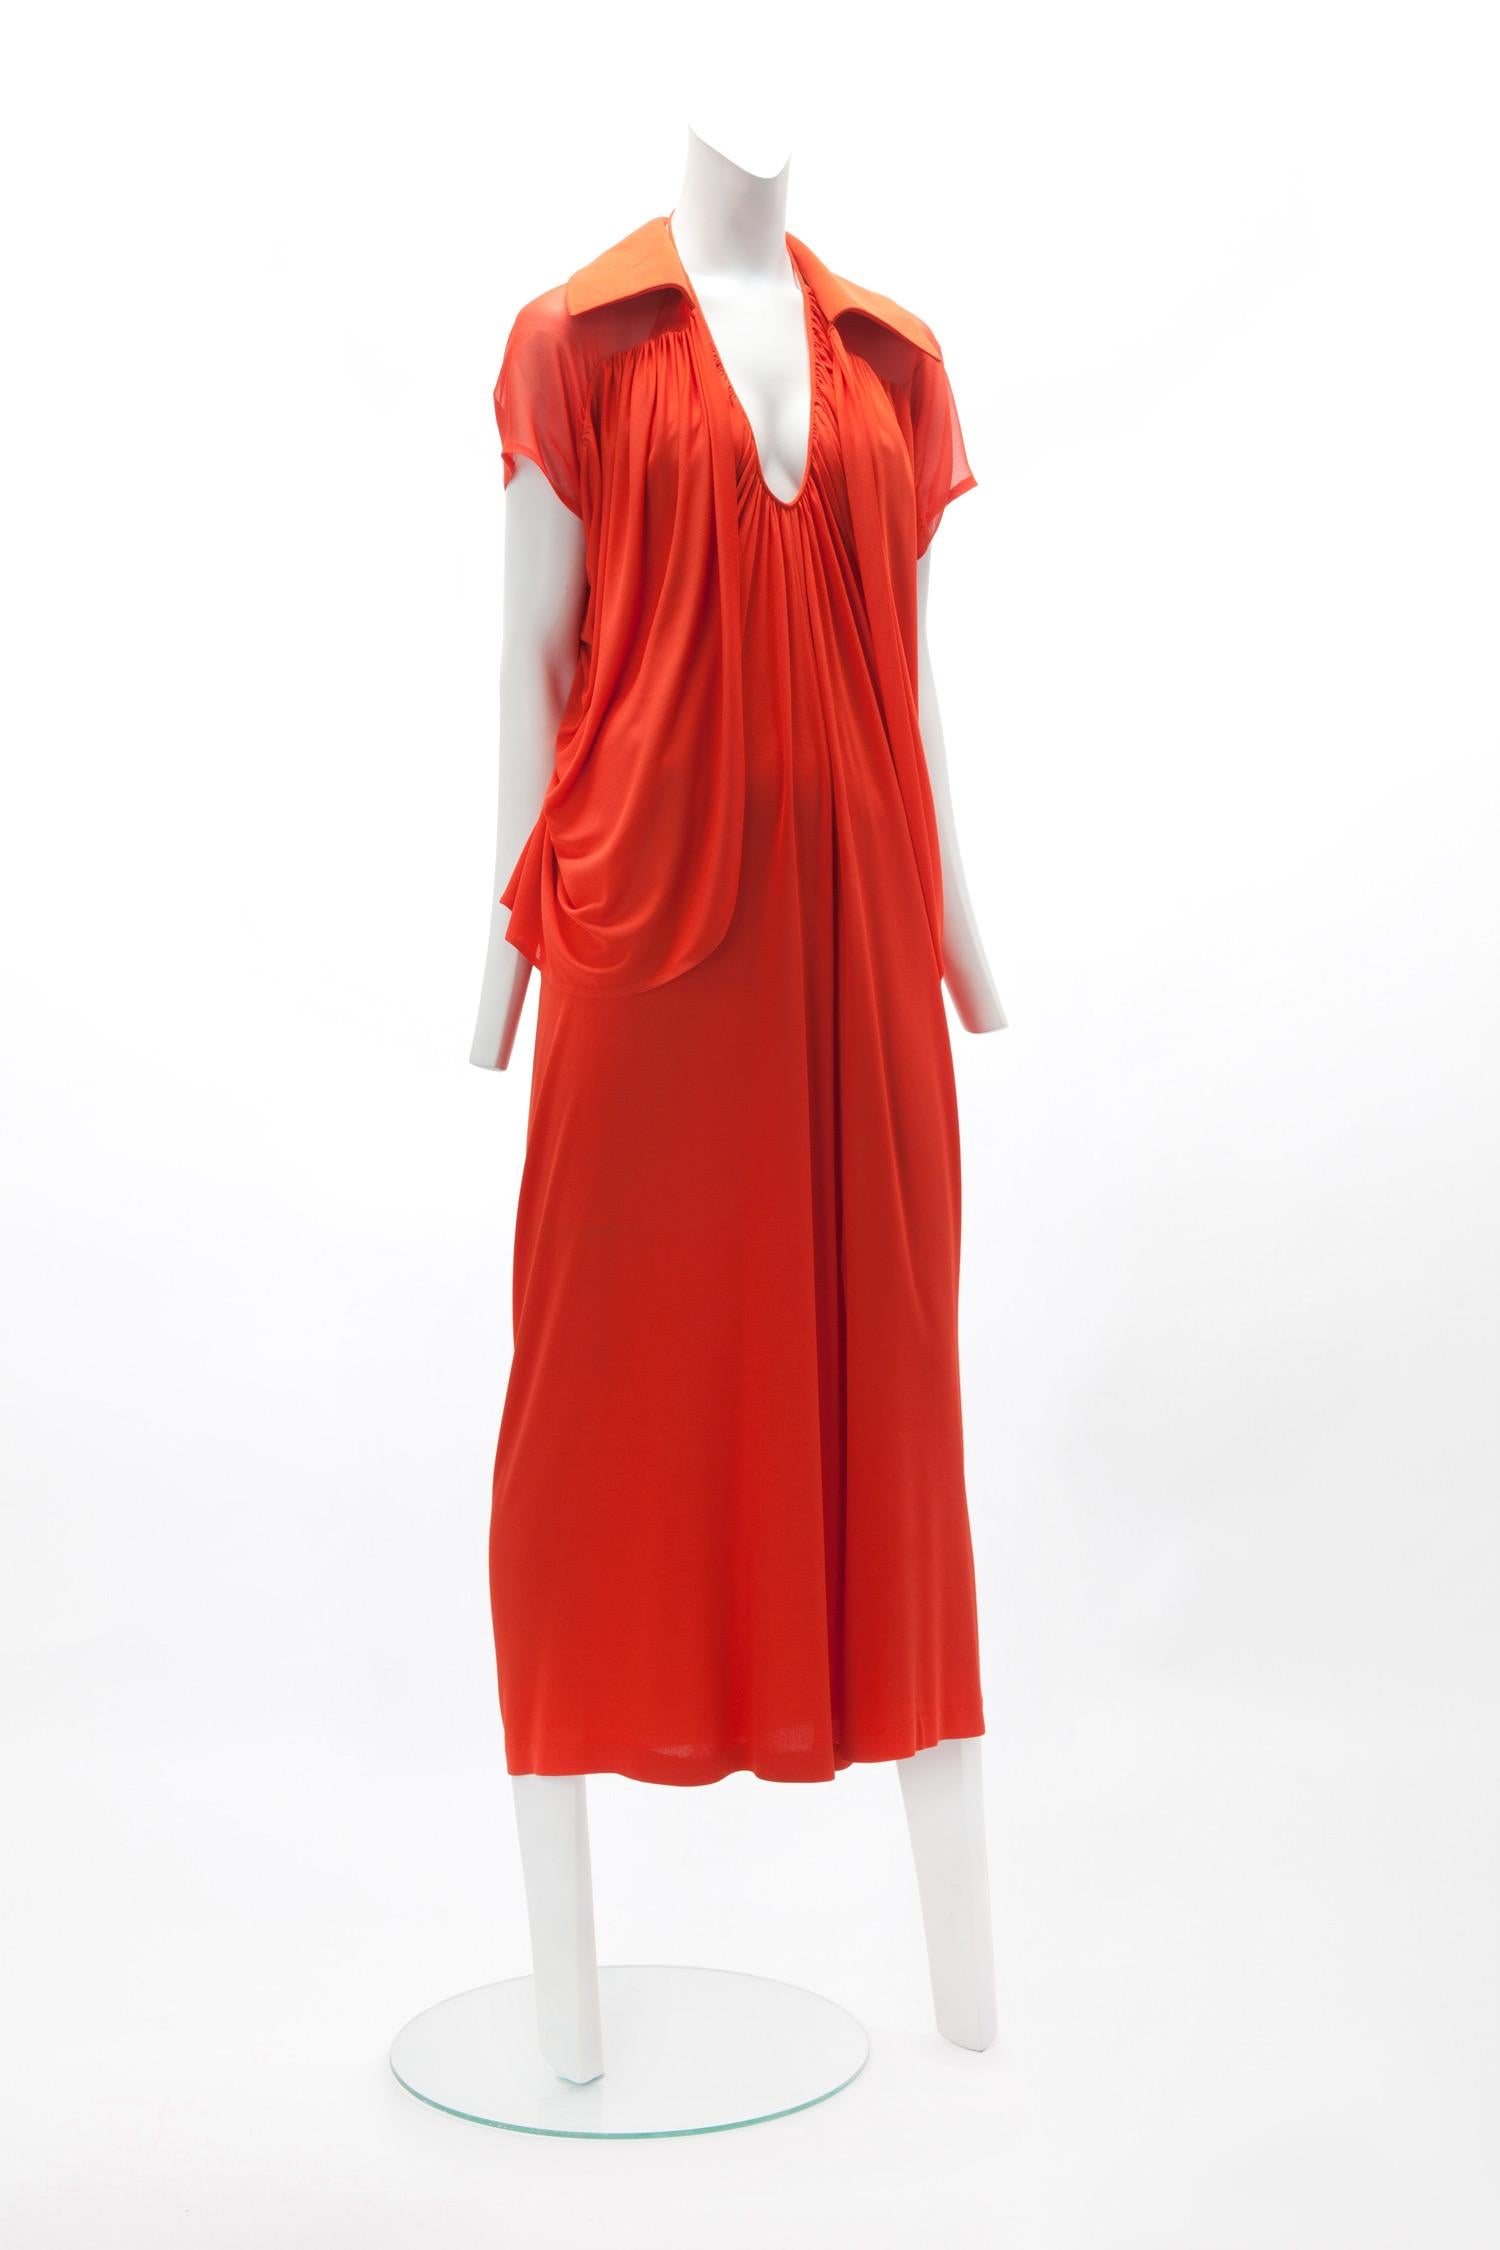 c. 1970s HALSTON Orange Matte Jersey Halter Dress with Matching Jacket ; Draped U-Neckline with Cowl Back ; Rouleau Strap with Hook and Eye Closure ; Slit at Center Front ; Short Sleeve Jacket with Chiffon Yoke ; Labeded 